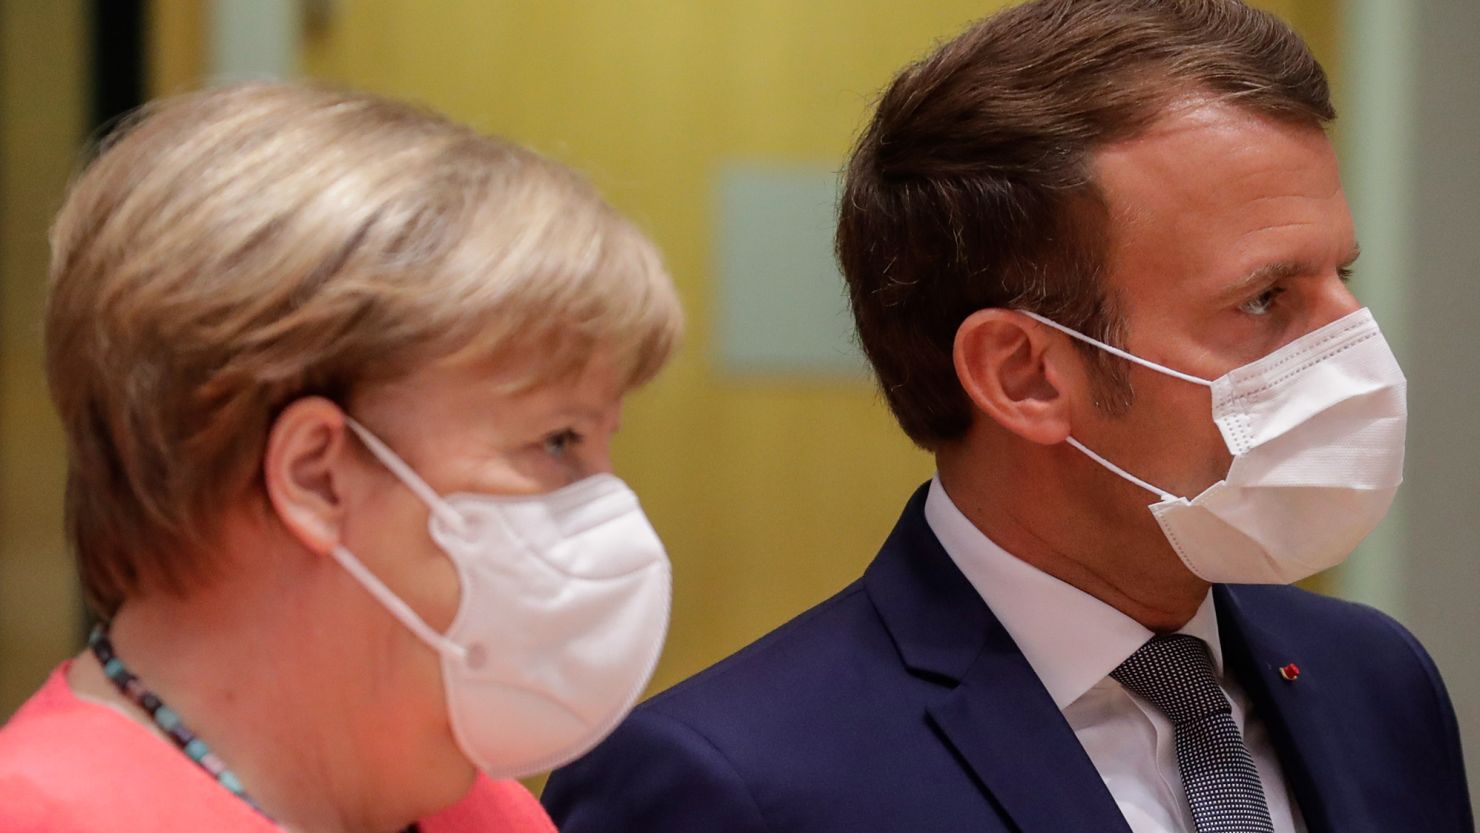 Germany's Chancellor Angela Merkel (L) and France's President Emmanuel Macron attend prior the start of the European Union Council in Brussels on July 17, 2020.